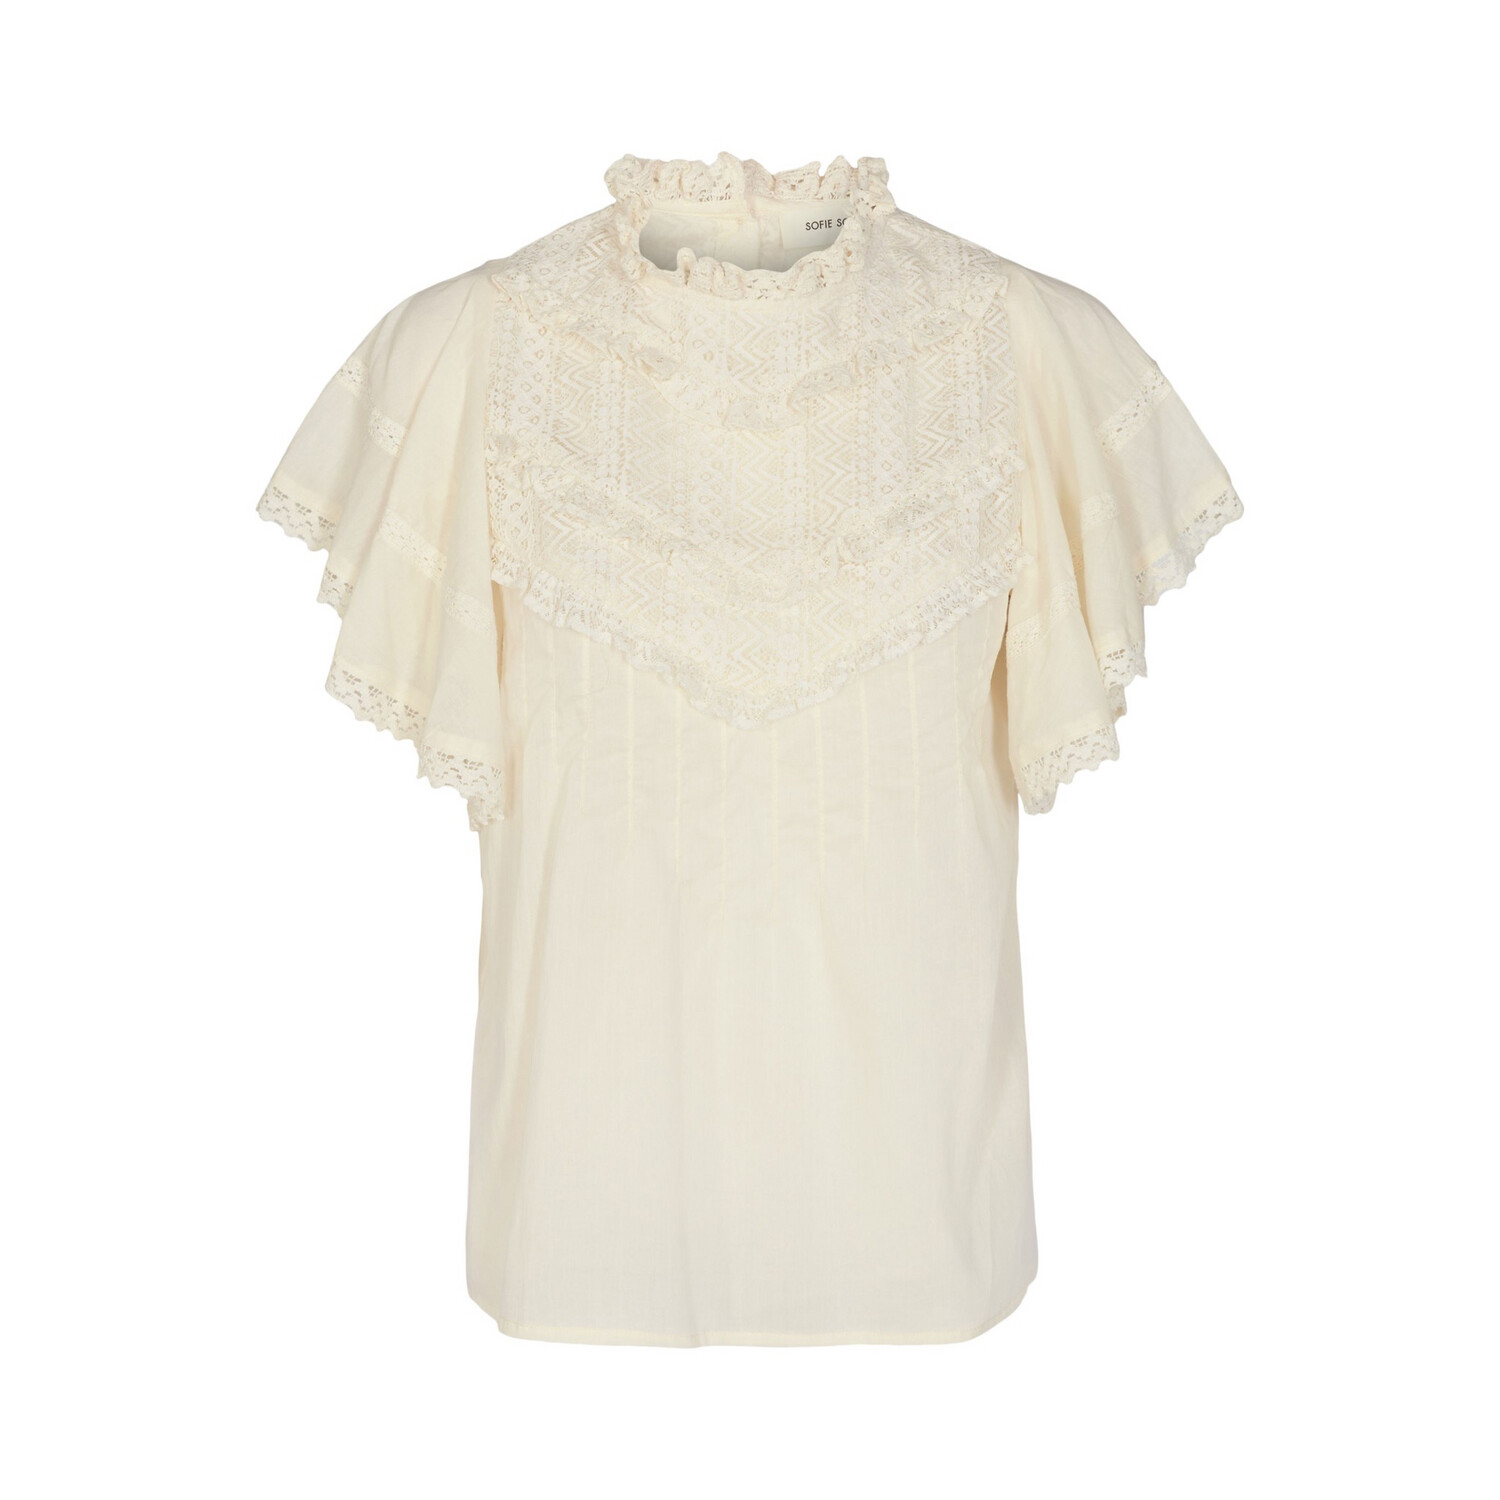 Sofie Schnoor Short Sleeve Cotton Lace Blouse